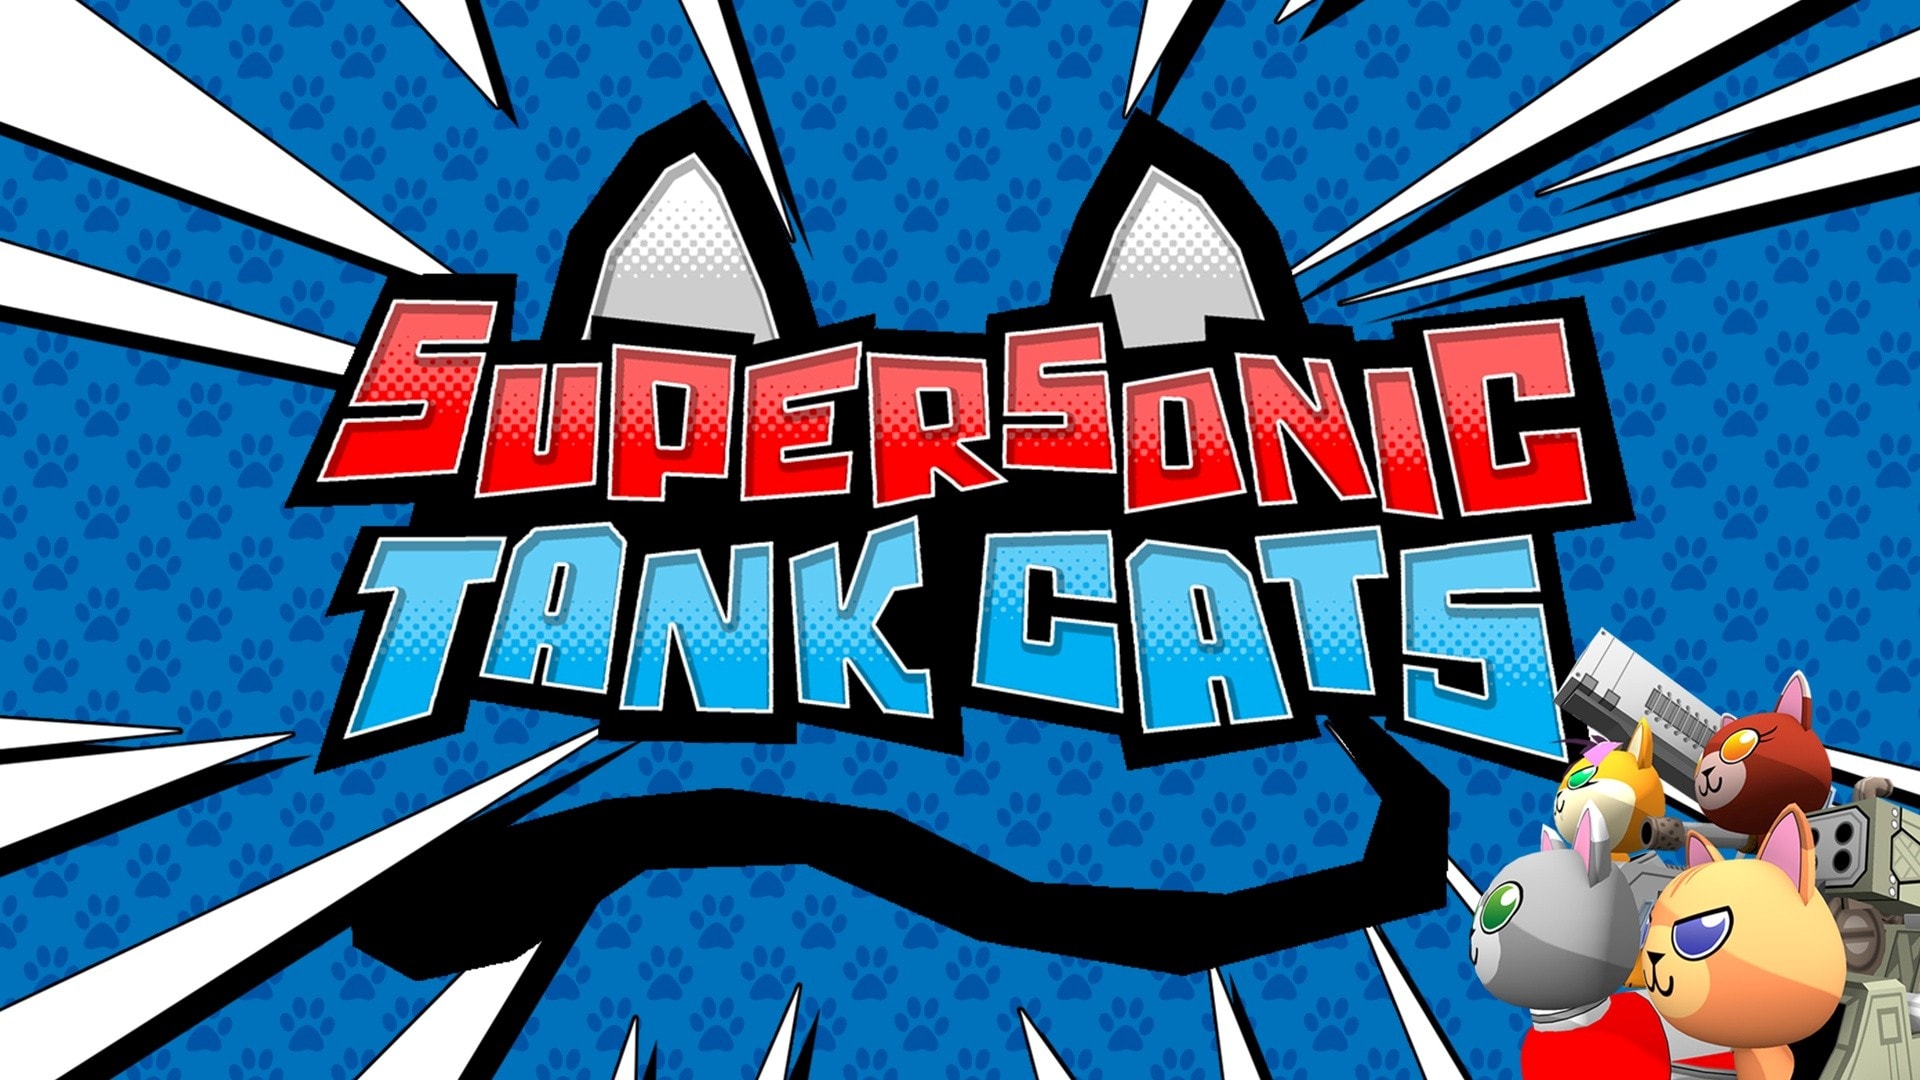 Supersonic Tank Cats